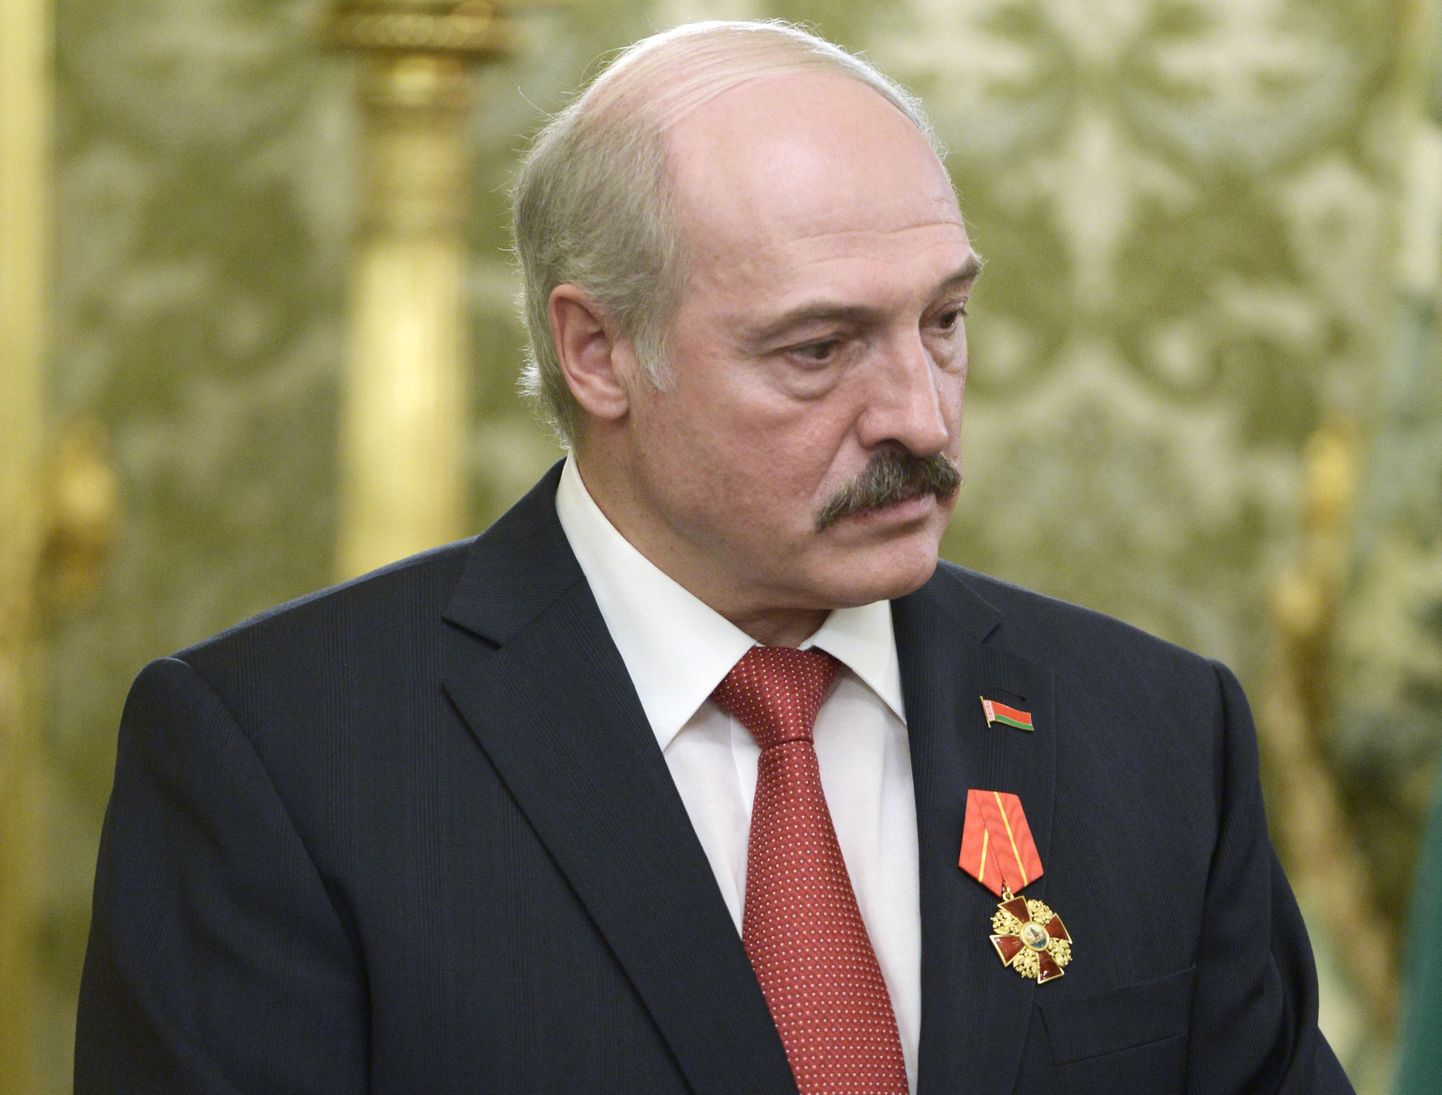 2582495 03/03/2015 March 3, 2015. Belarusian President Alexander Lukashenko, awarded with the Order of Alexander Nevsky, during the meeting with President Vladimir Putin before the session of the Supreme State Council of the Russia-Belarus Union State in the Grand Kremlin Palace. Aleksey Nikolskyi/RIA Novosti